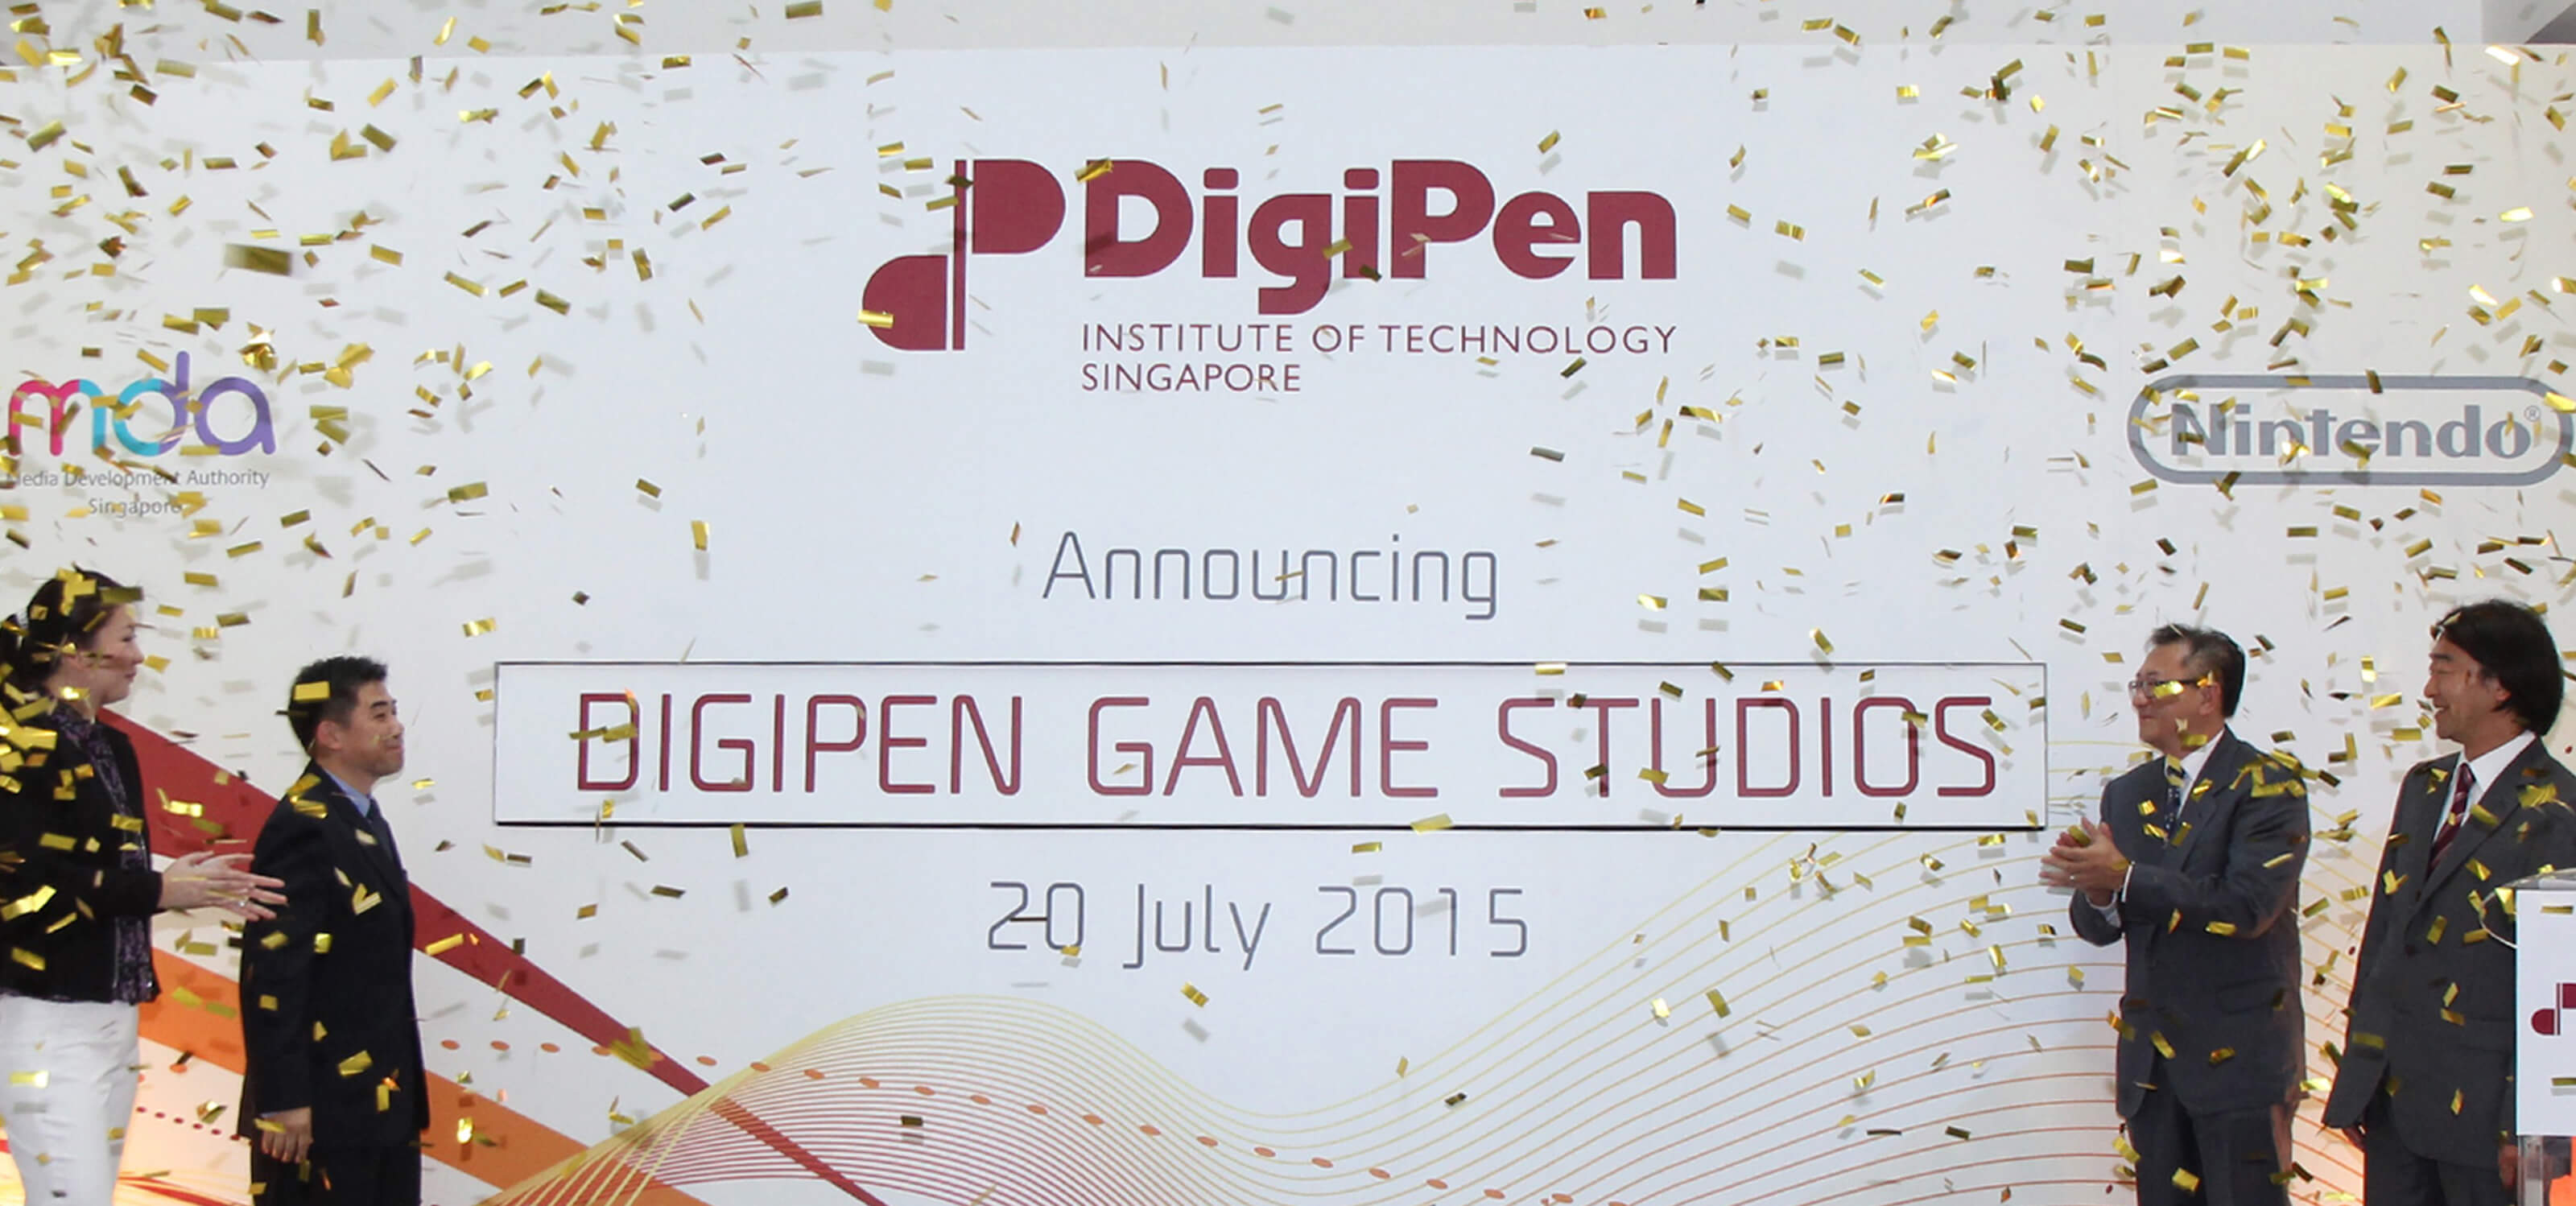 Representatives of DigiPen applaud the unveiling of the DigiPen Game Studios onstage as gold confetti falls from above